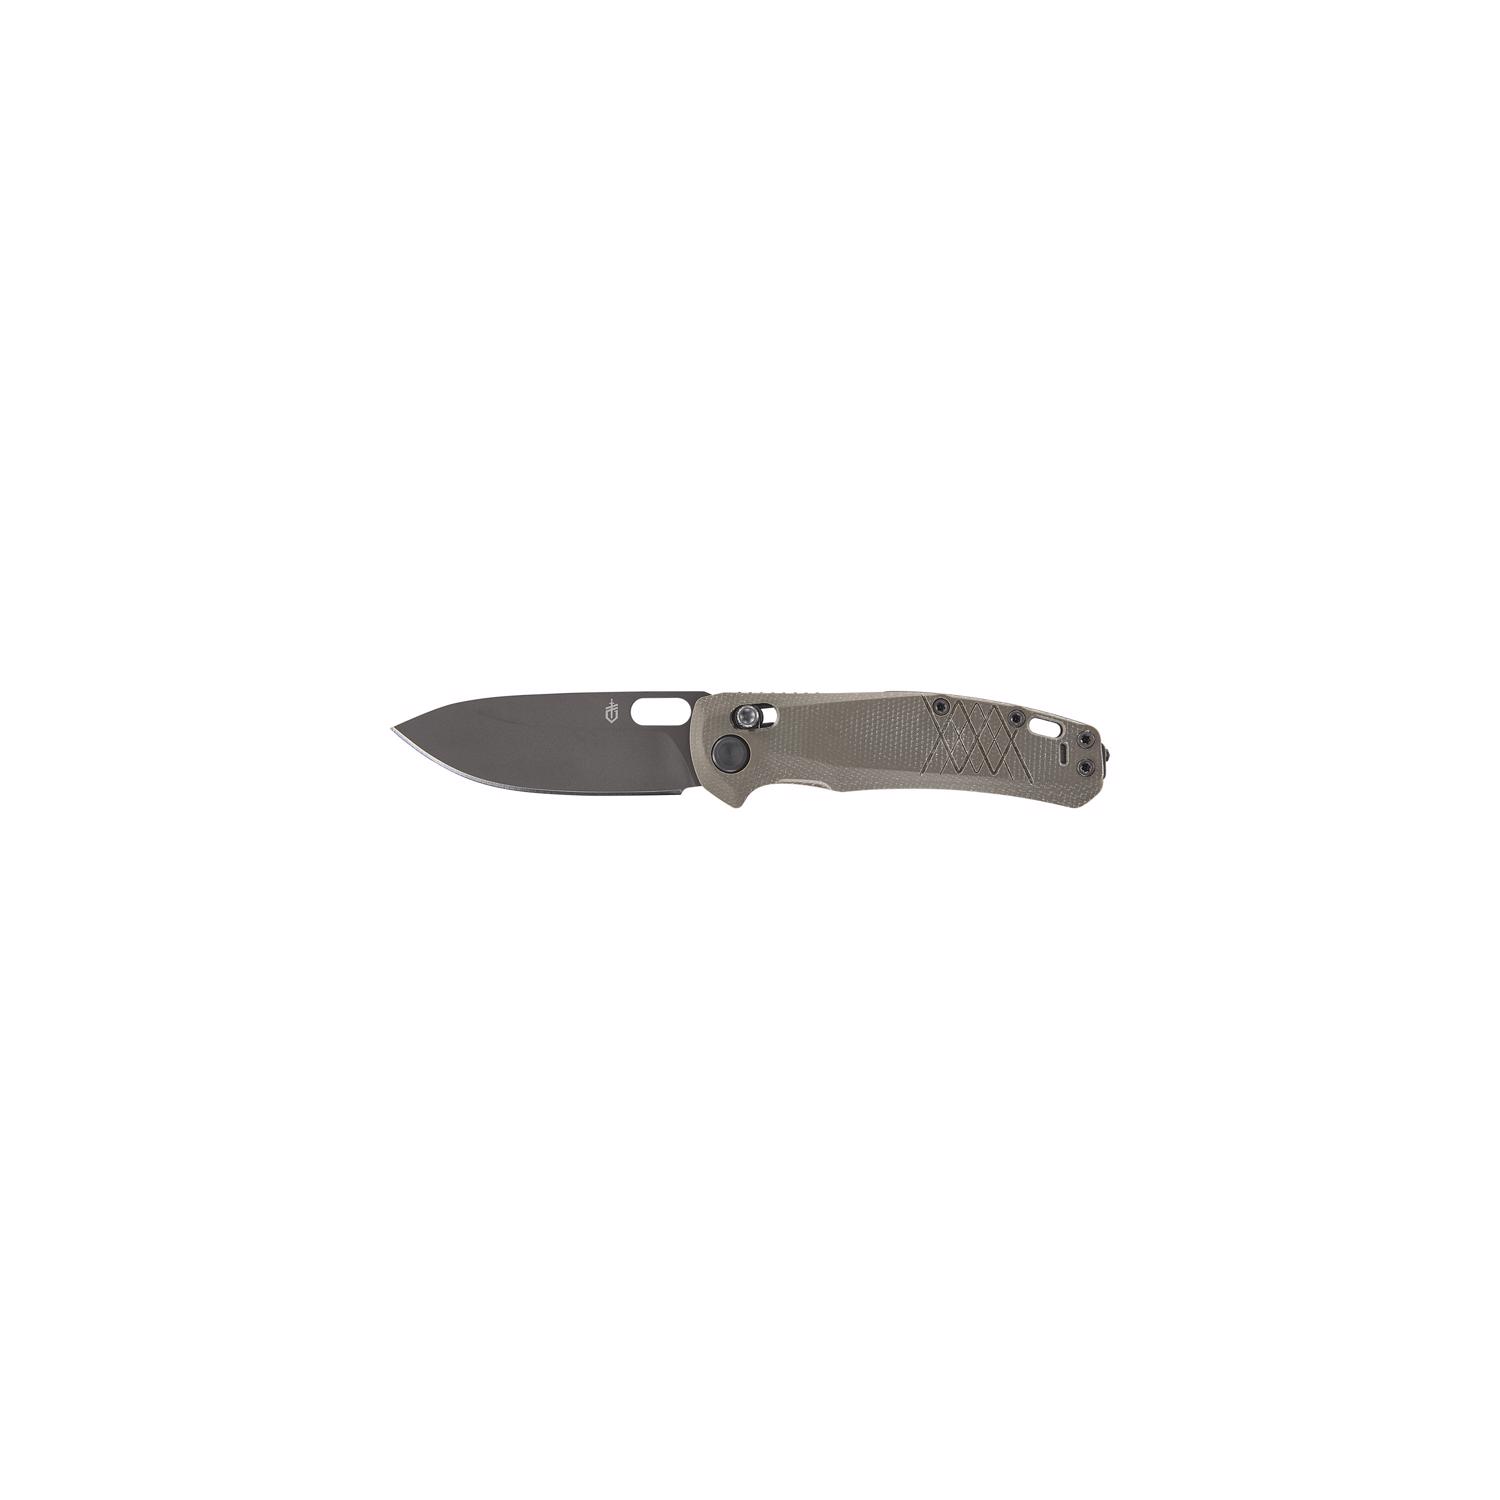 Photos - Other sporting goods Gerber Scout Tan 440 Stainless Steel 7.64 in. Micarta Pocket Knife 1064580 